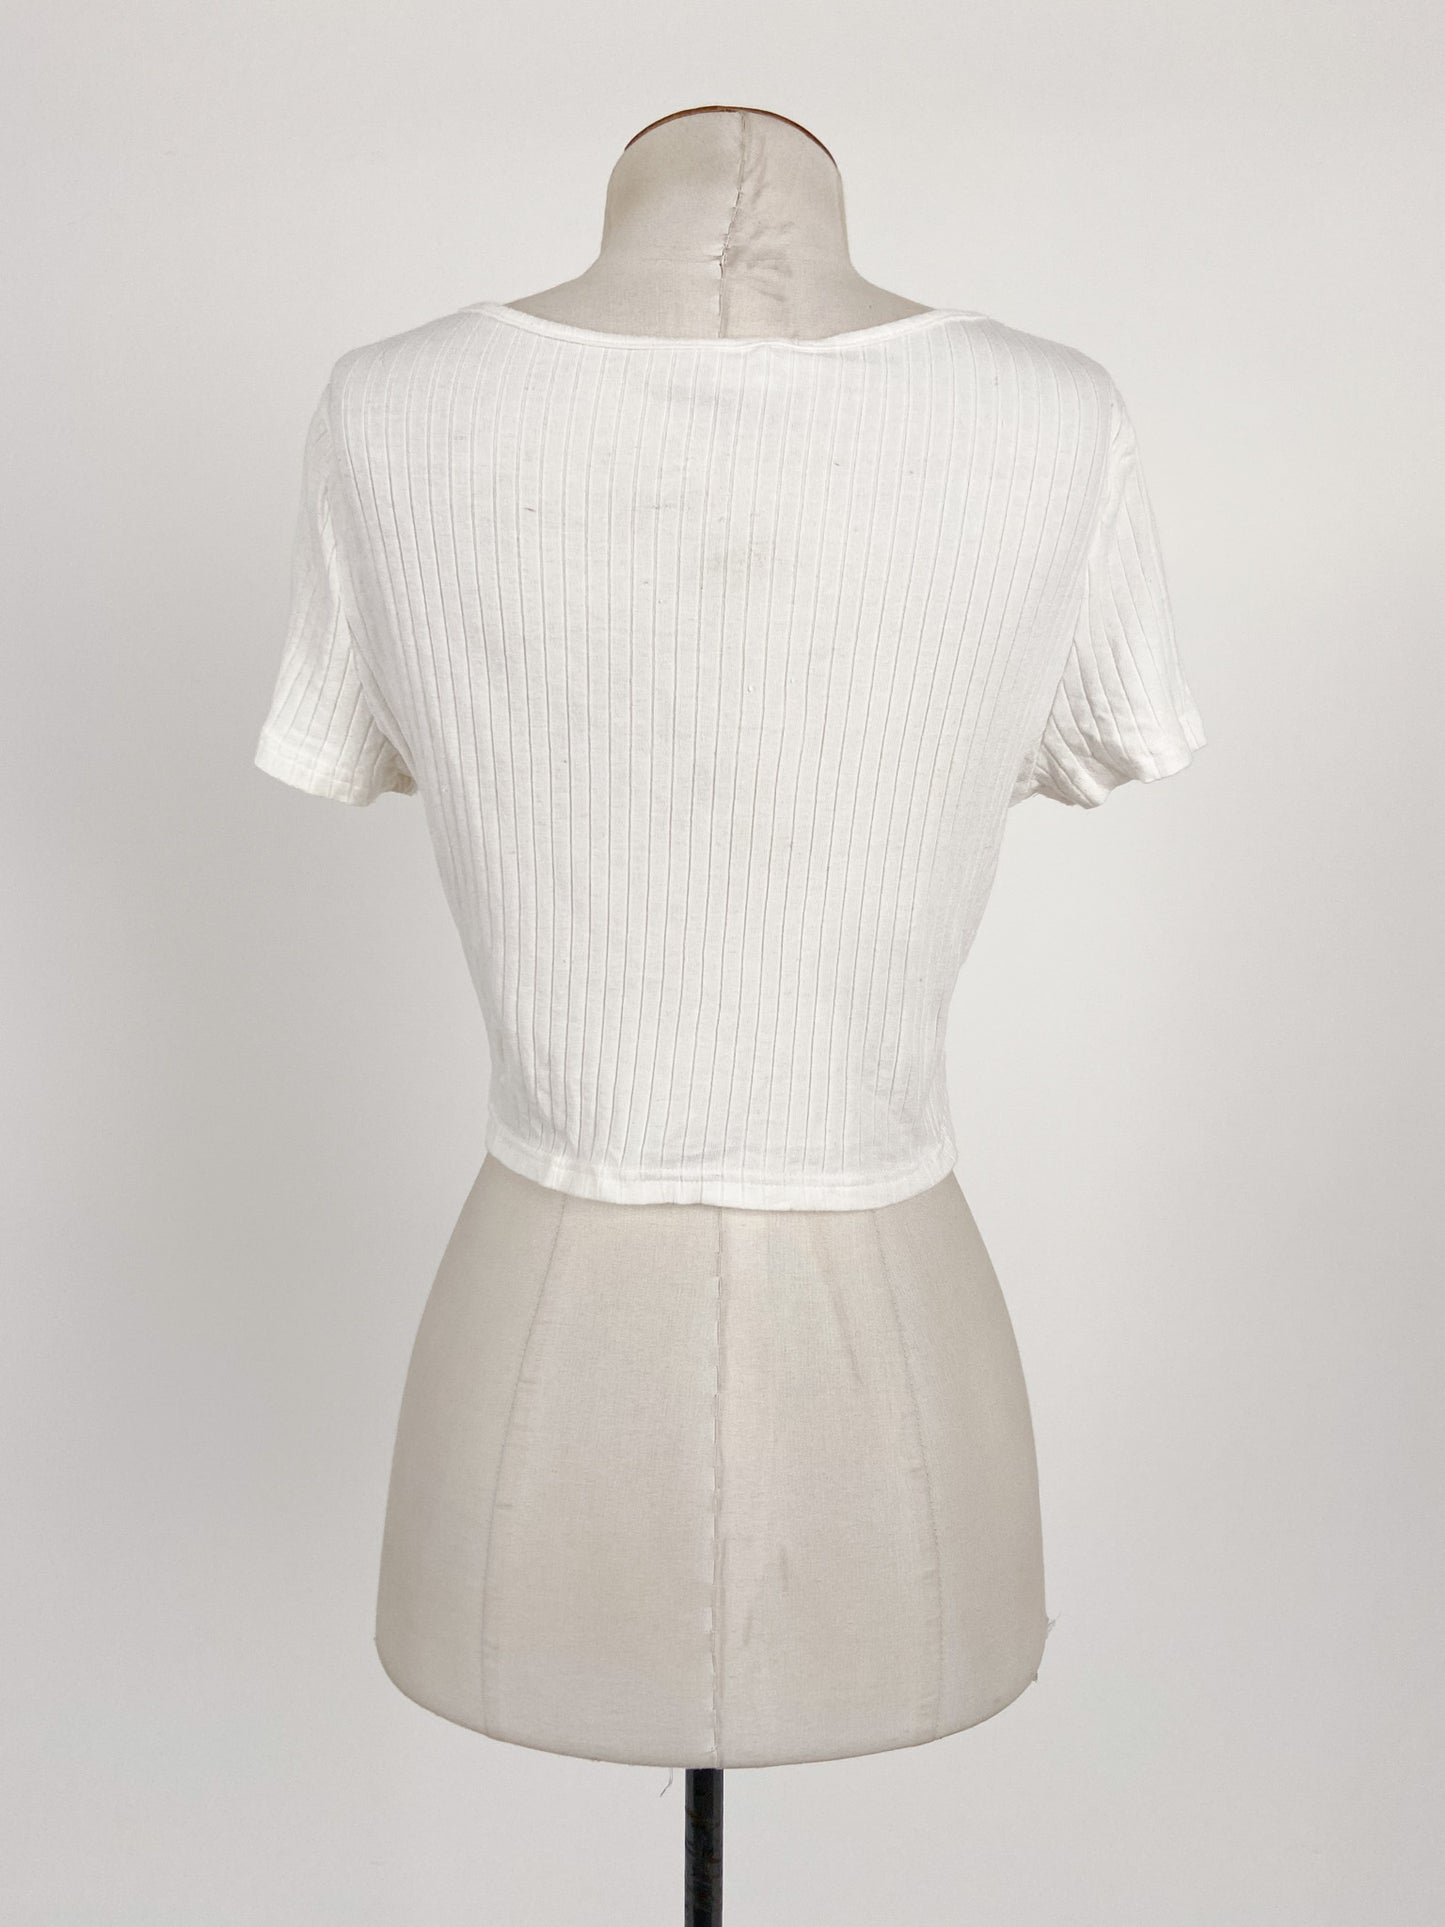 Winnie & Co. | White Casual Top | Size 8